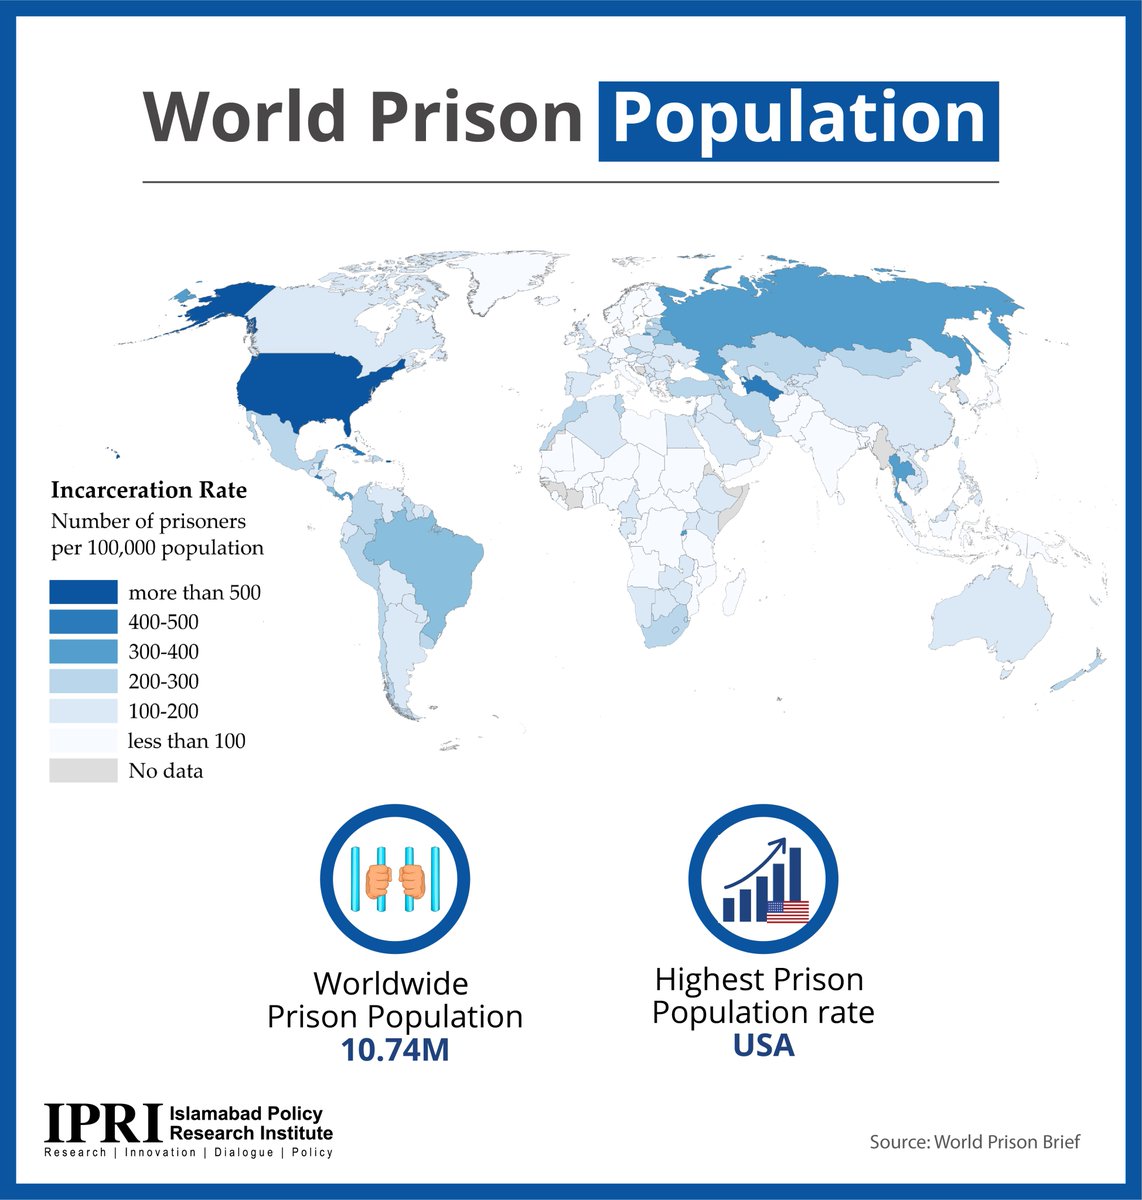 IPRI Infolytics| World Prison Population

The infographic below illustrates the population incarcerated throughout the world and helps to gauge which country has the highest prison population rate in the world.

#prisonpopulation